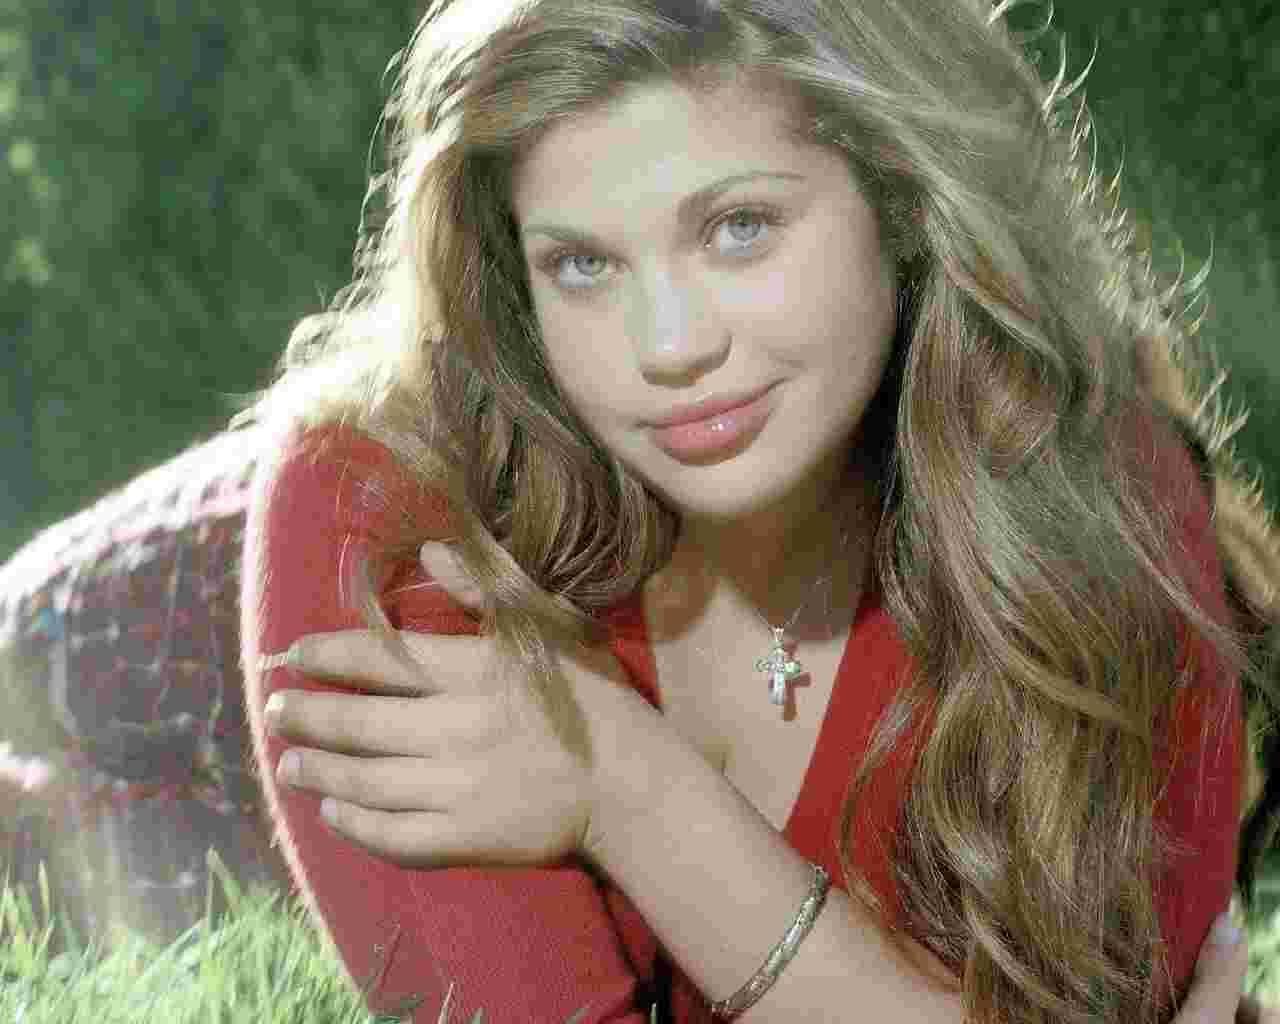 Pictures of Danielle Fishel, Picture #166536 - Pictures Of Celebrities1280 x 1024